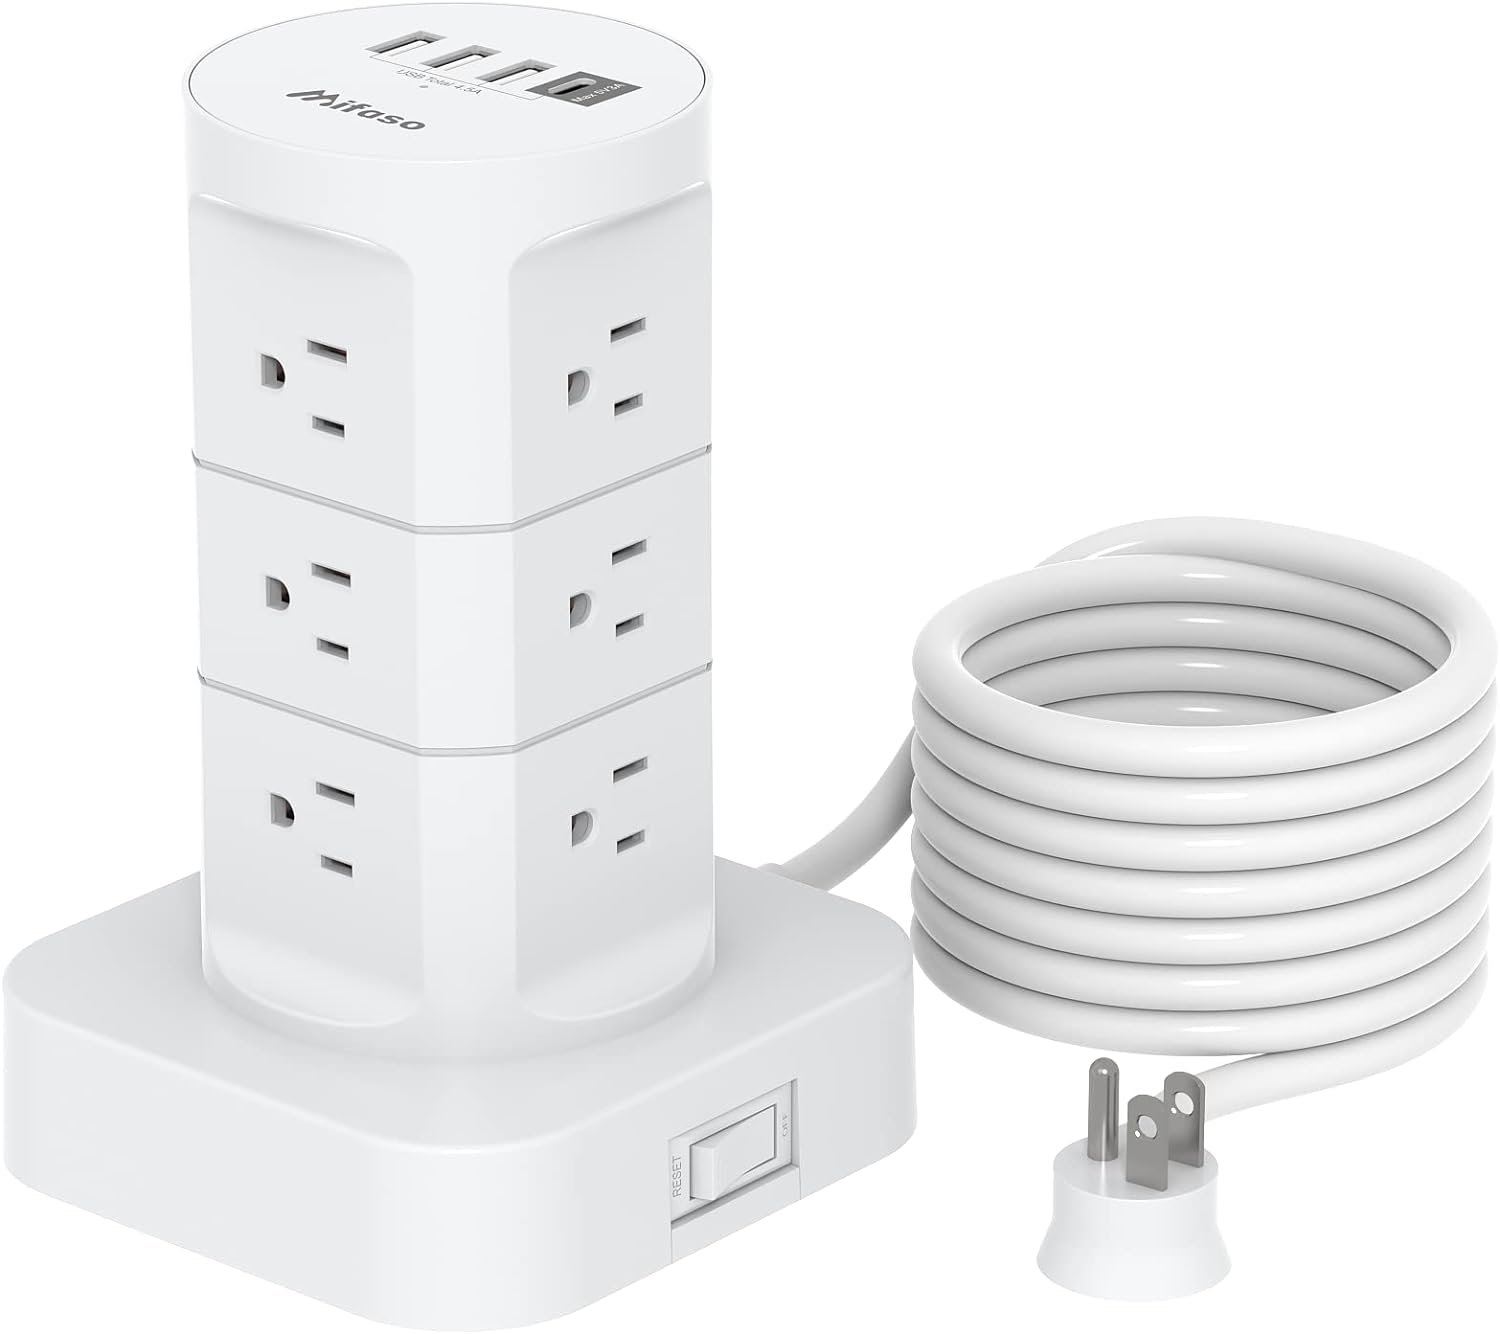 Surge Protector Power Strip Tower - 10FT Heavy Duty Extension Cord, 12 Wide Outlets with 4 USB Ports (1 USB C), Flat Plug, Charging Tower Overload Protection for Home Office